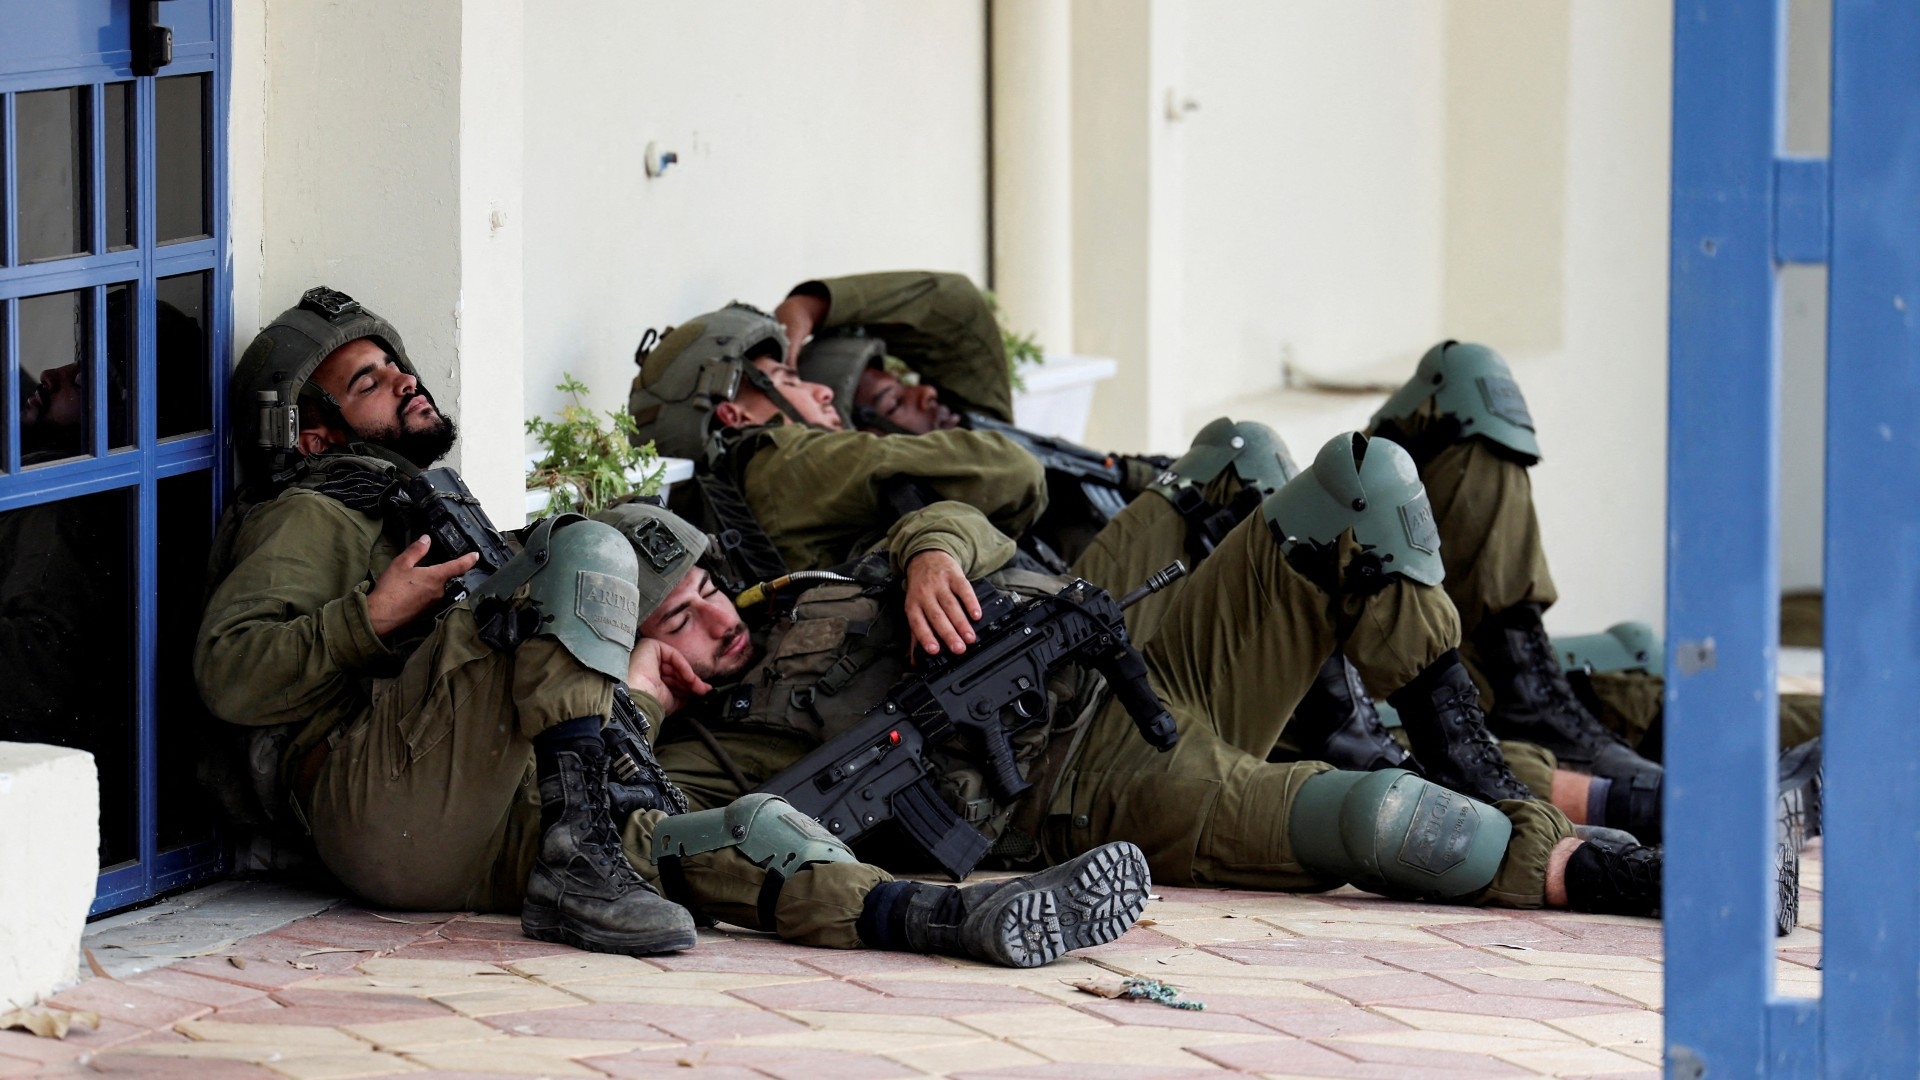 Israeli soldiers rest near a building the day after a mass attack by Hamas gunmen from the Gaza Strip, in Sderot, southern Israel 8 October (Reuters)